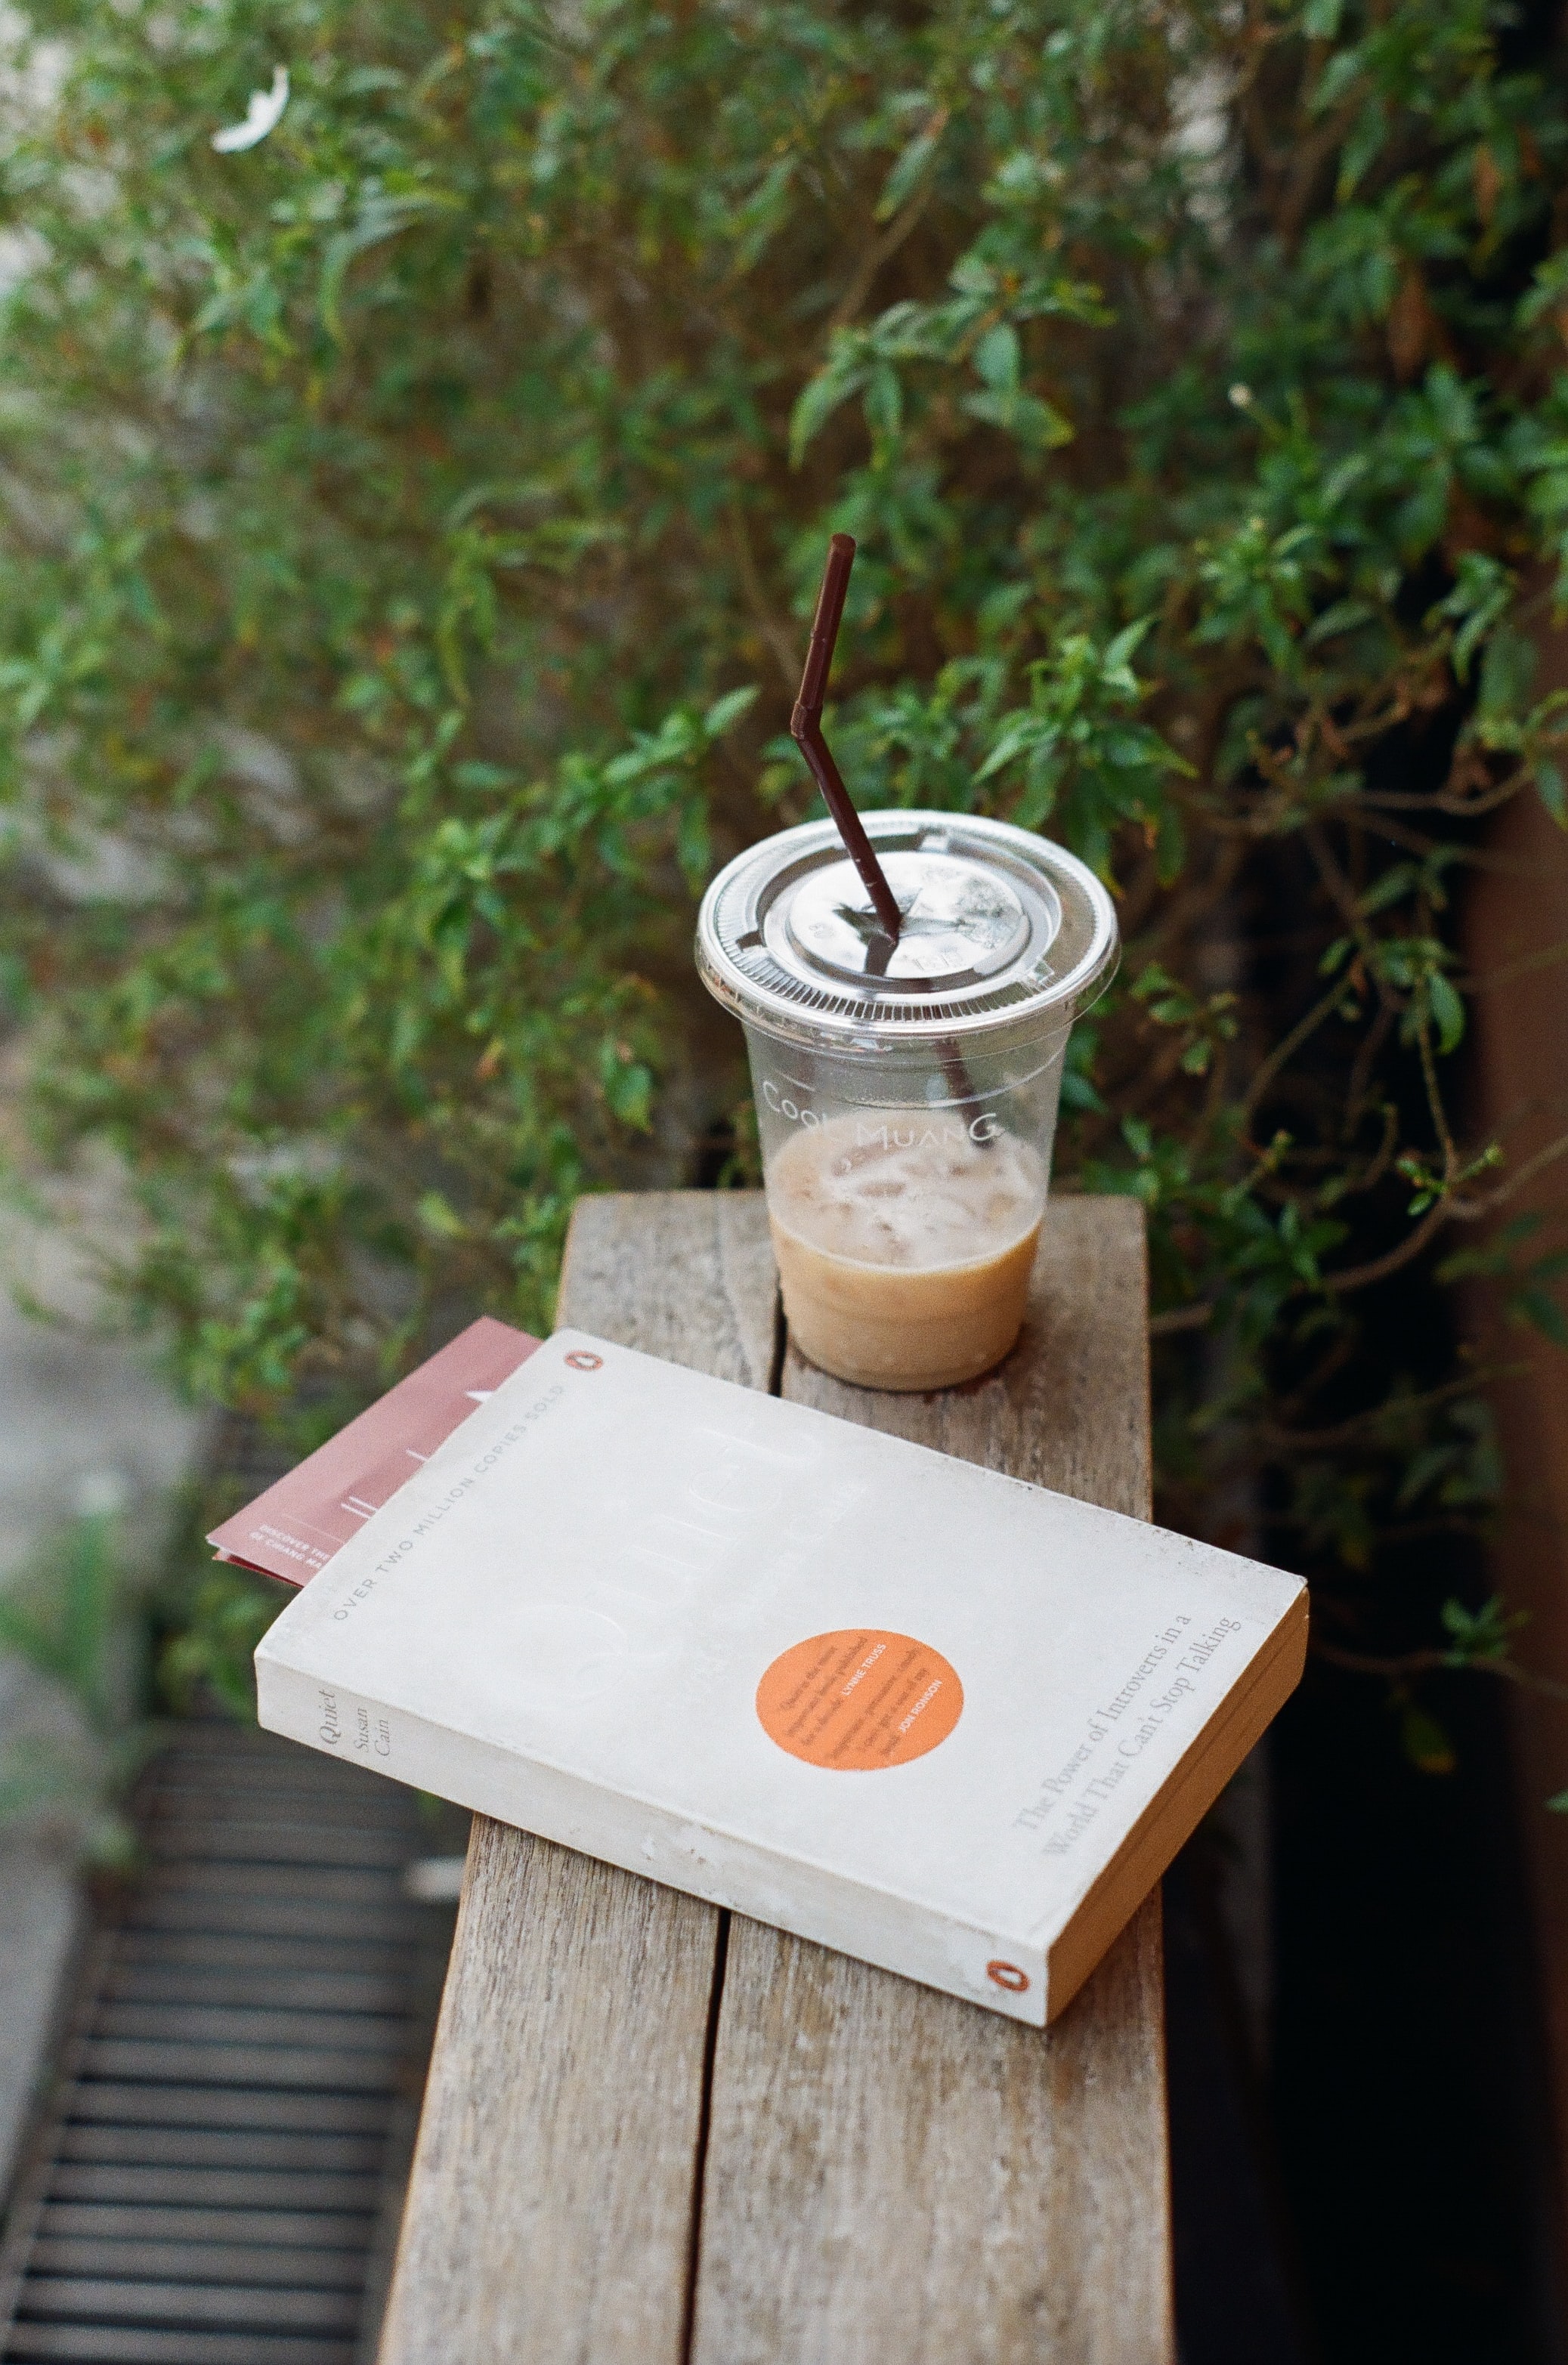 An iced coffee in a clear plastic cup on a wooden plant. There is a white book in front of it, and a green bush behind it.